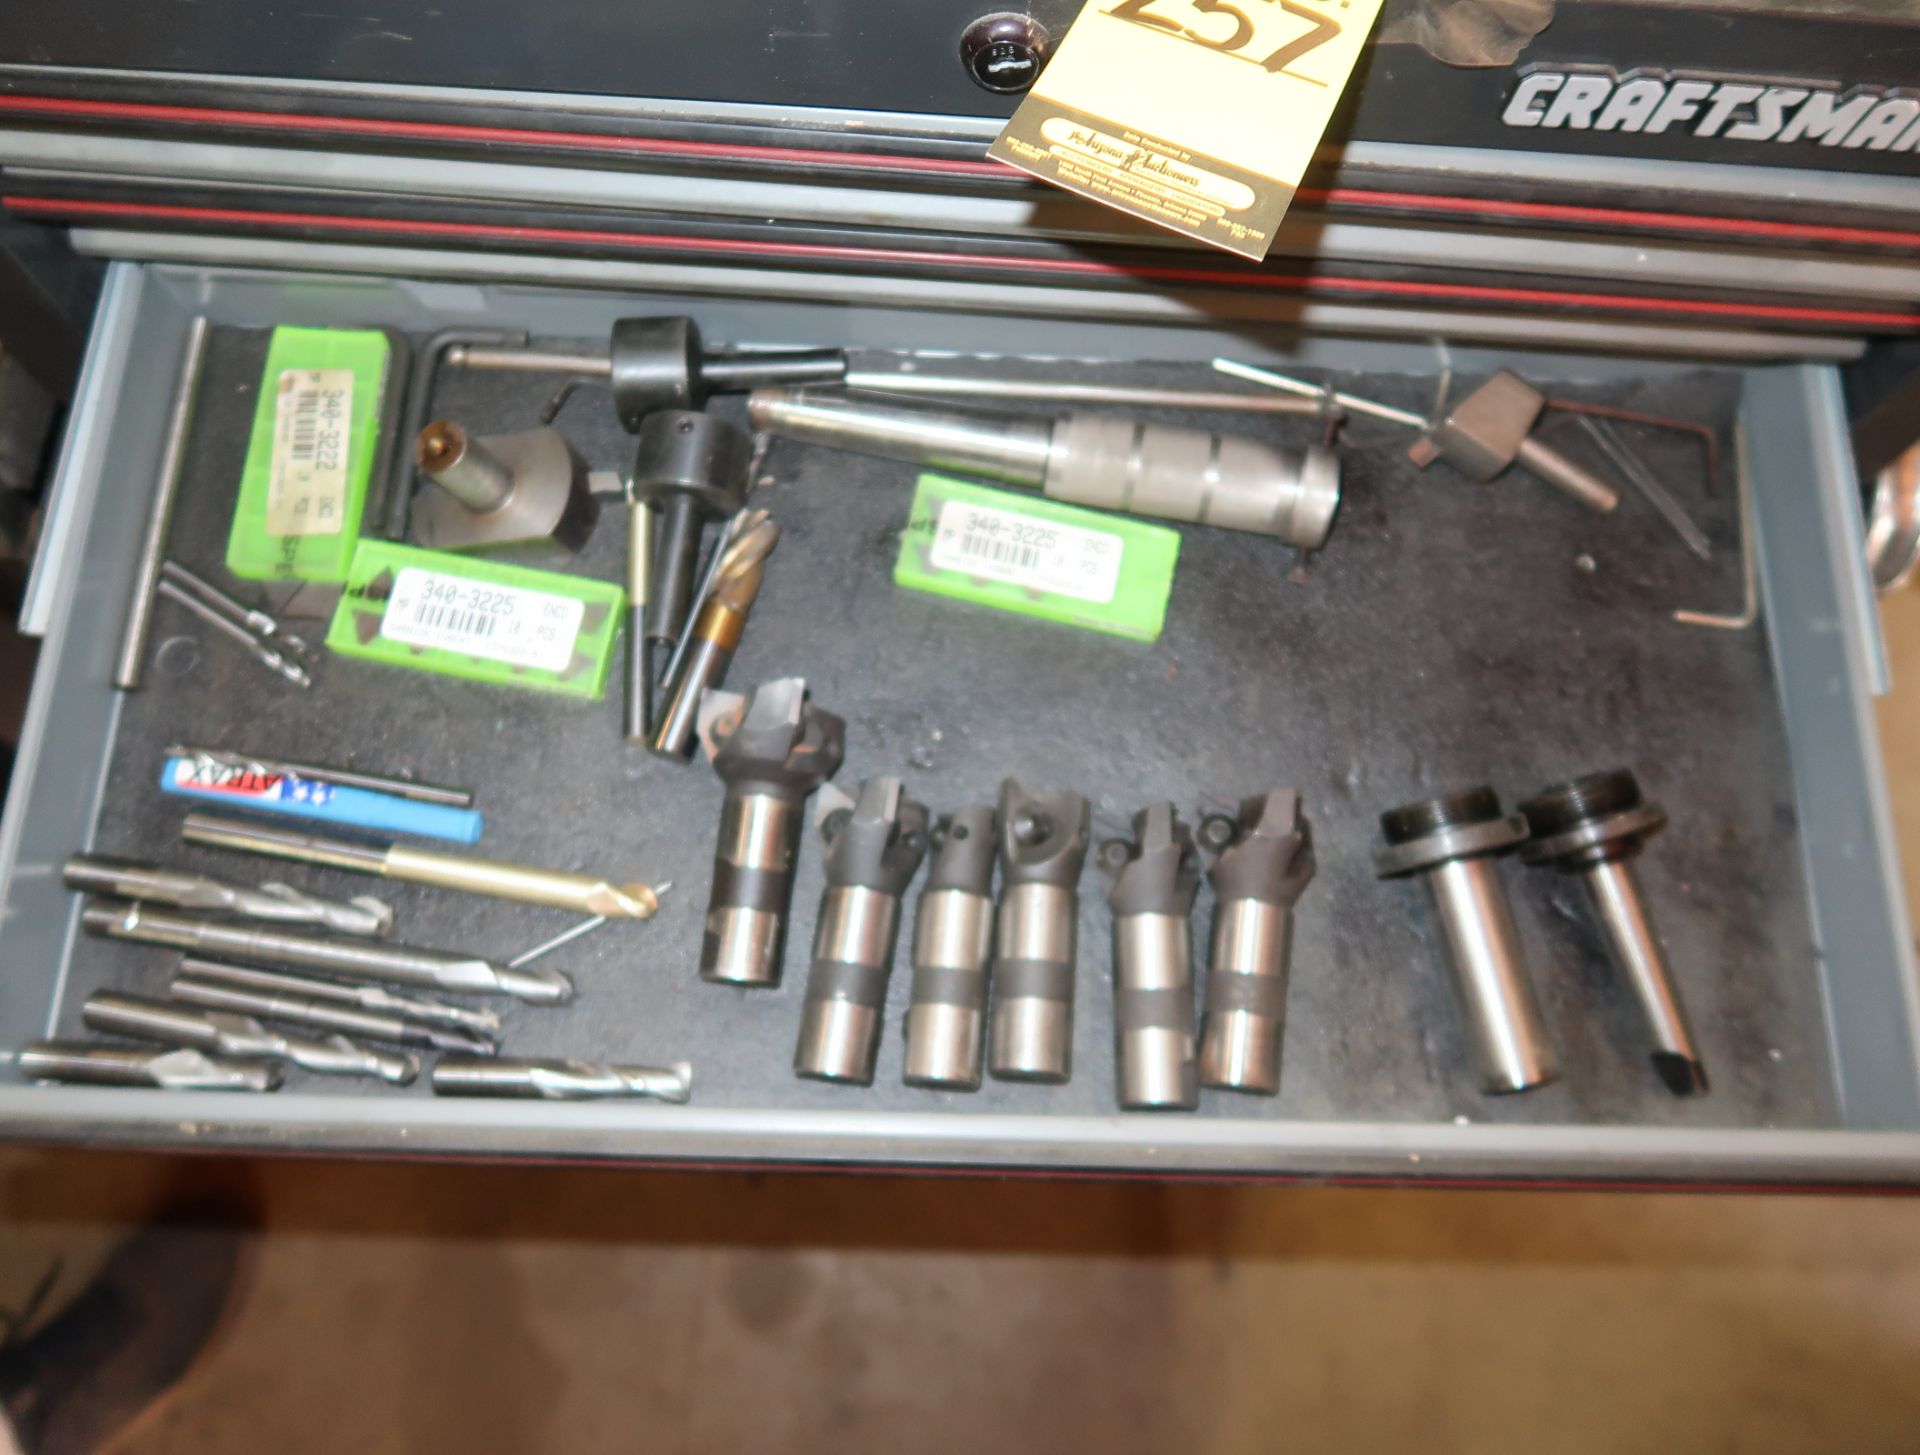 CRAFTSMAN TOOL BOX W/ CASTERS, ASST DRILL BITS, ETC - Image 4 of 5